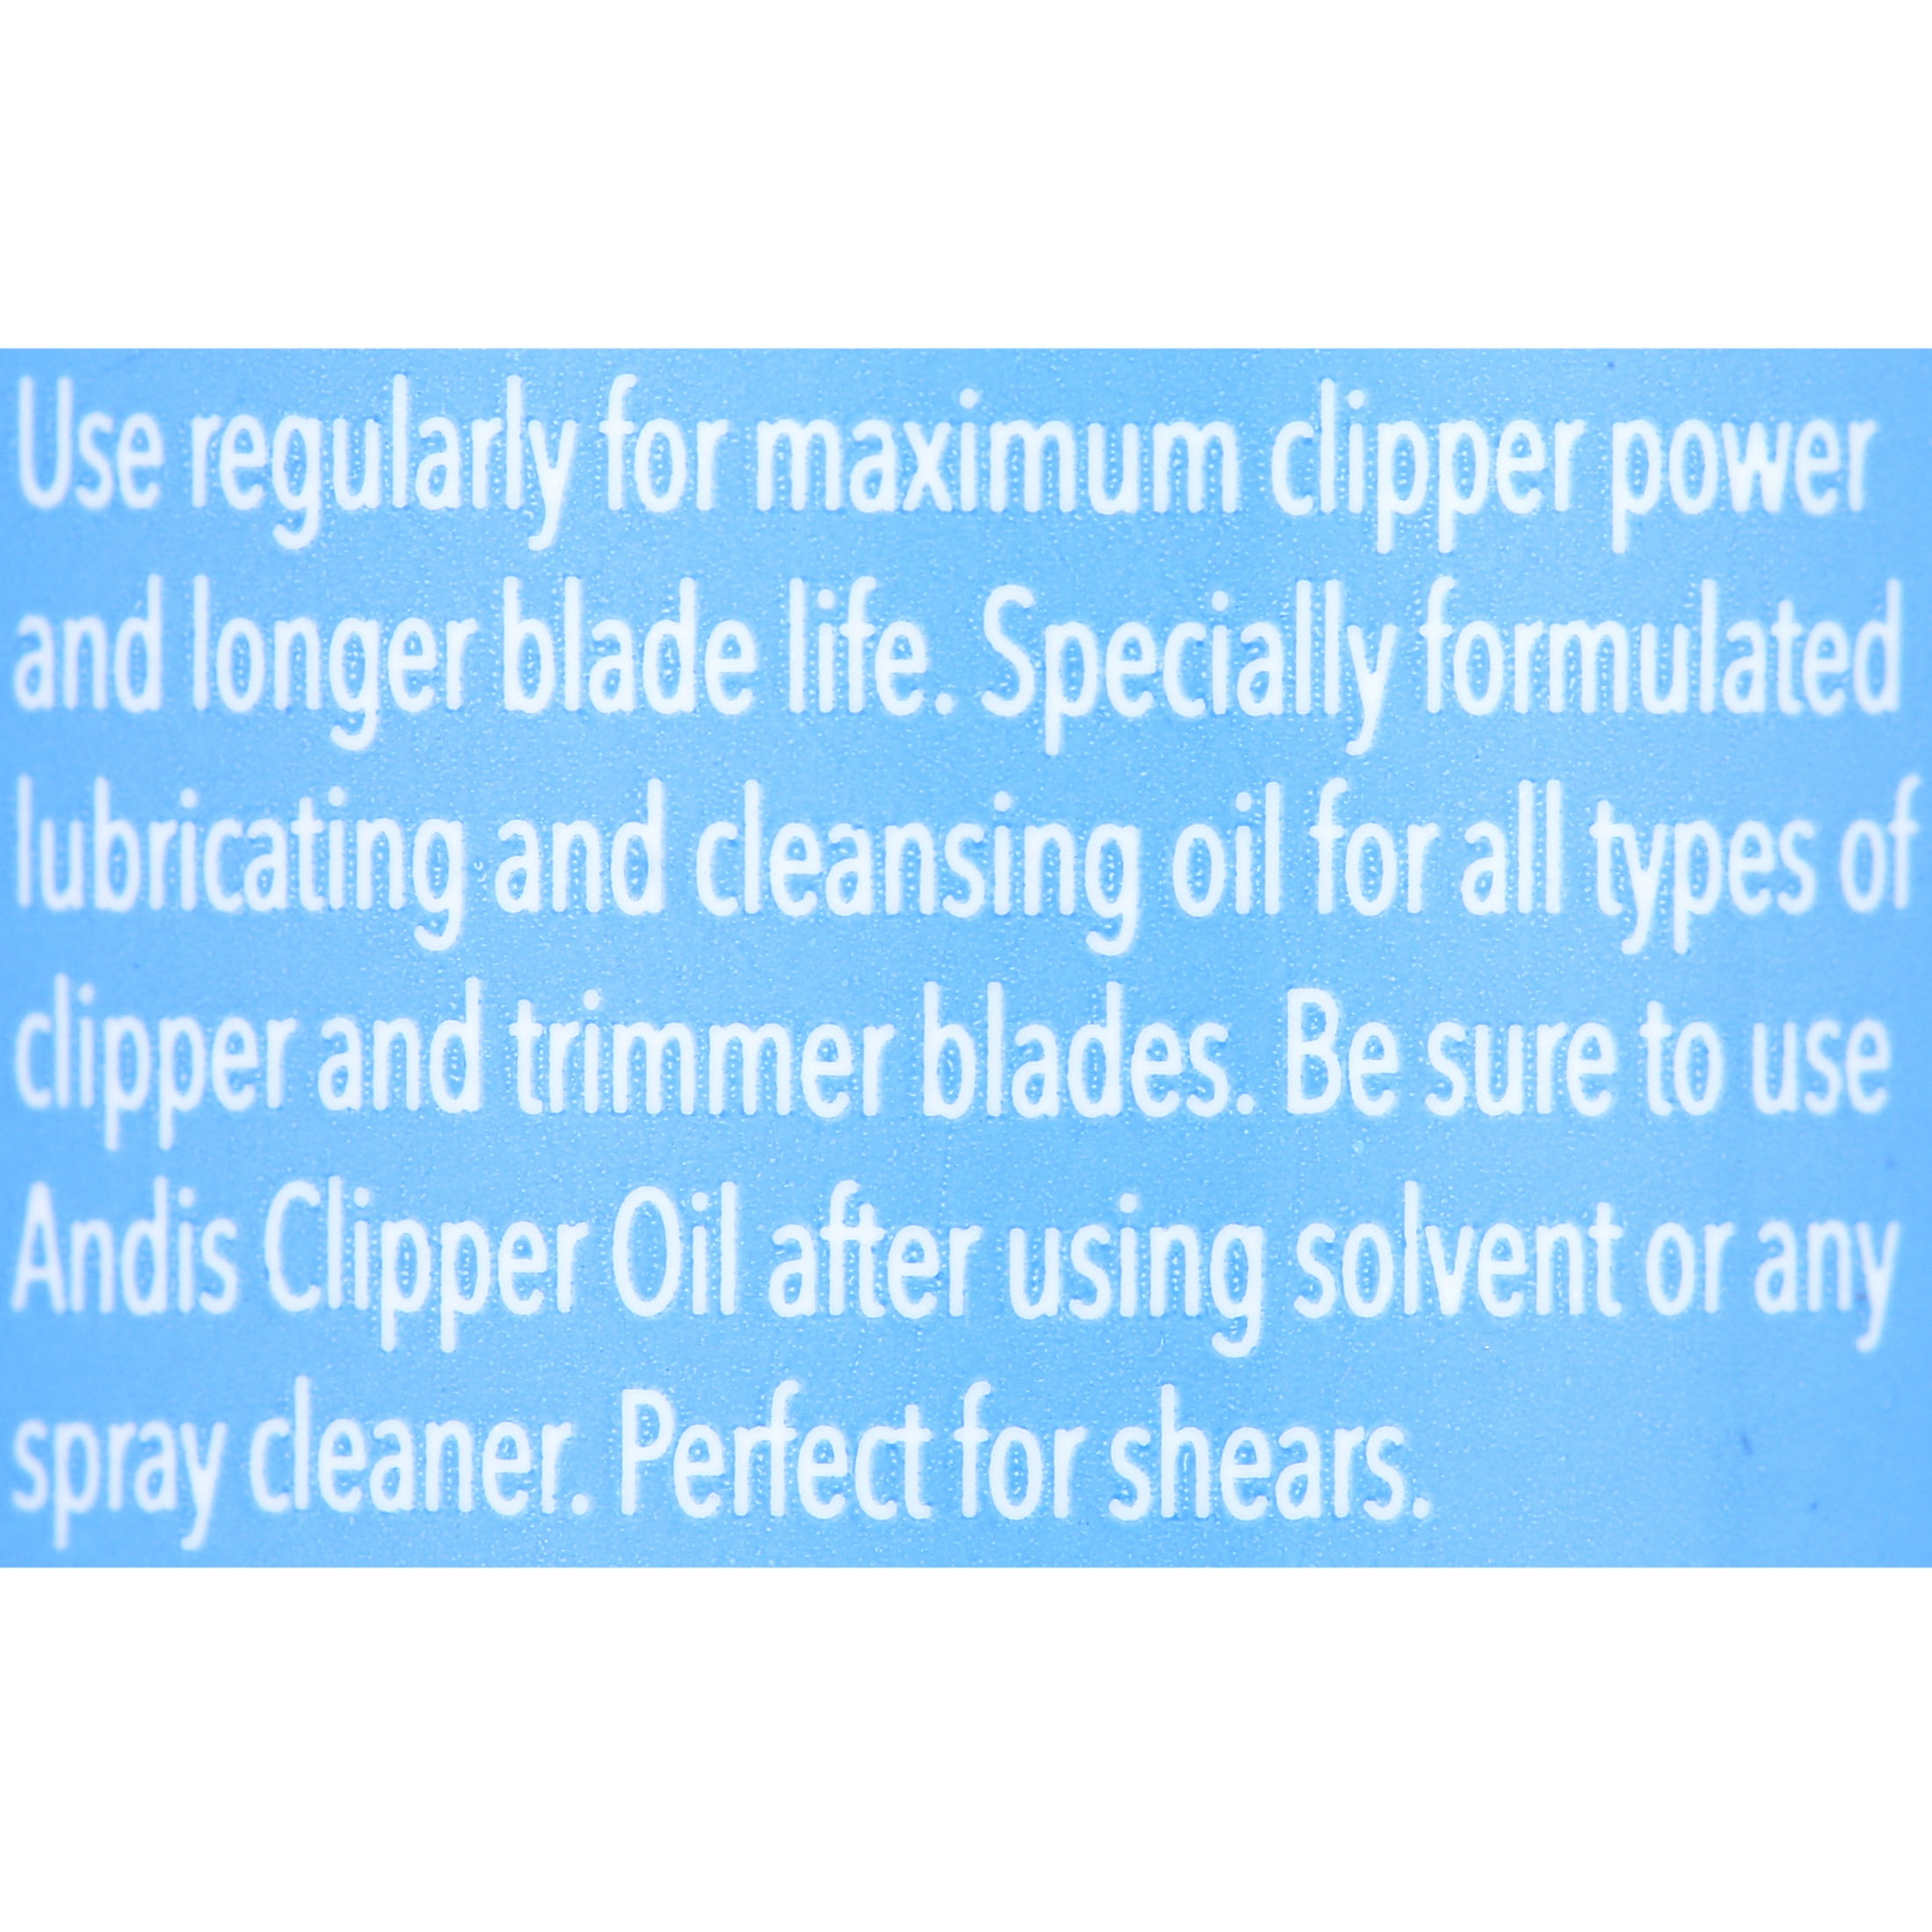 12 Pcs ANDIS Clipper Oil,Lubricant for Hair Clipper Trimmer Shaver Blade4fl  oz